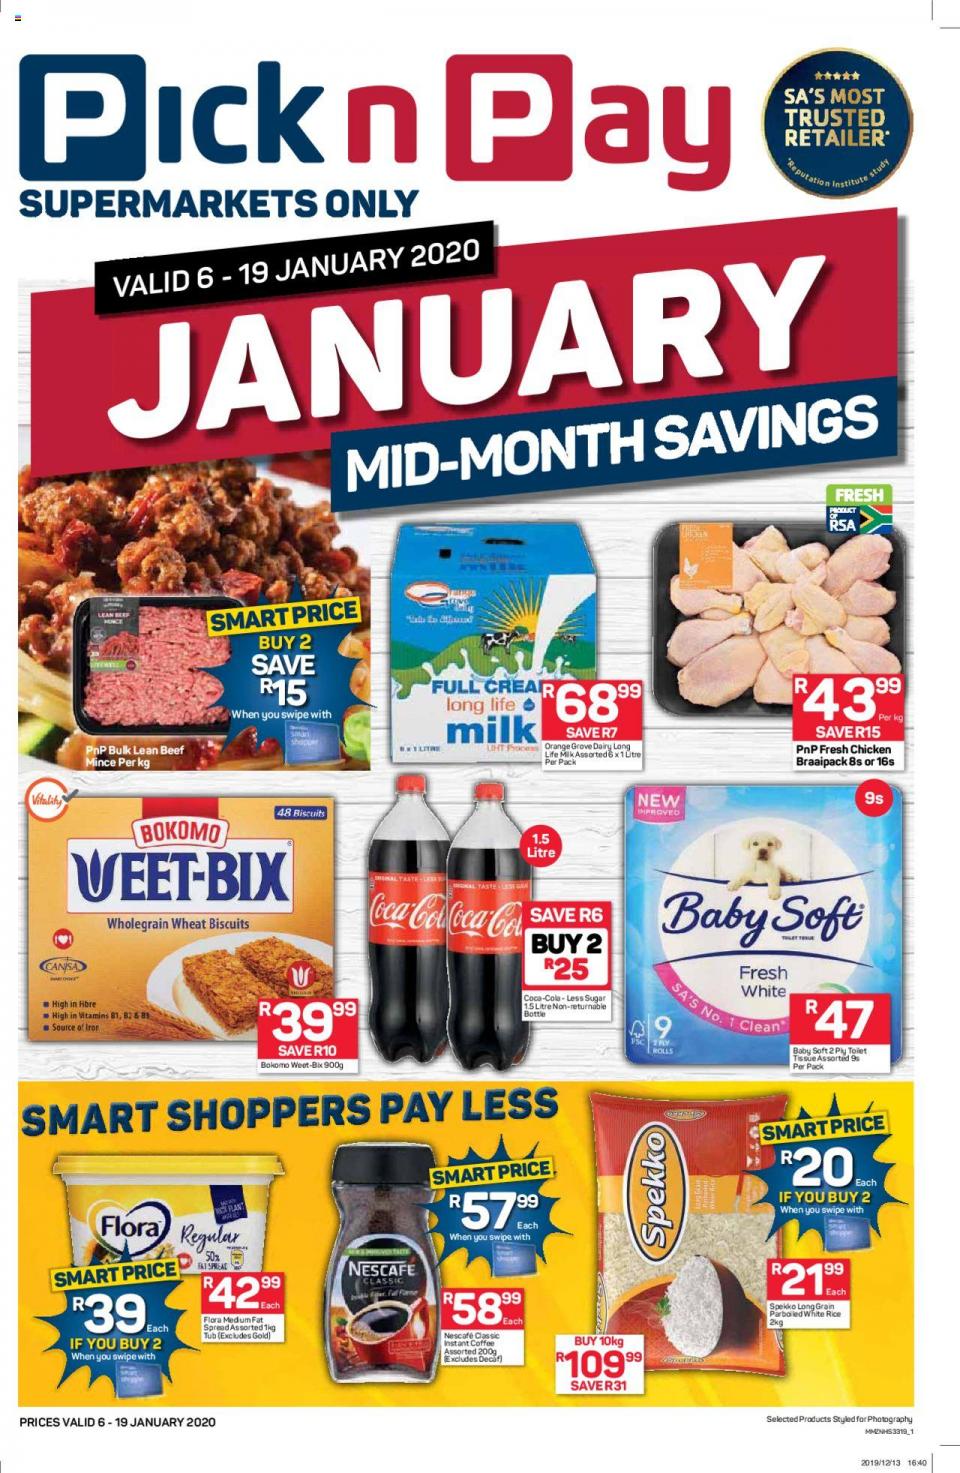 Pick n Pay Specials Mid-Month Savings 7 January 2020